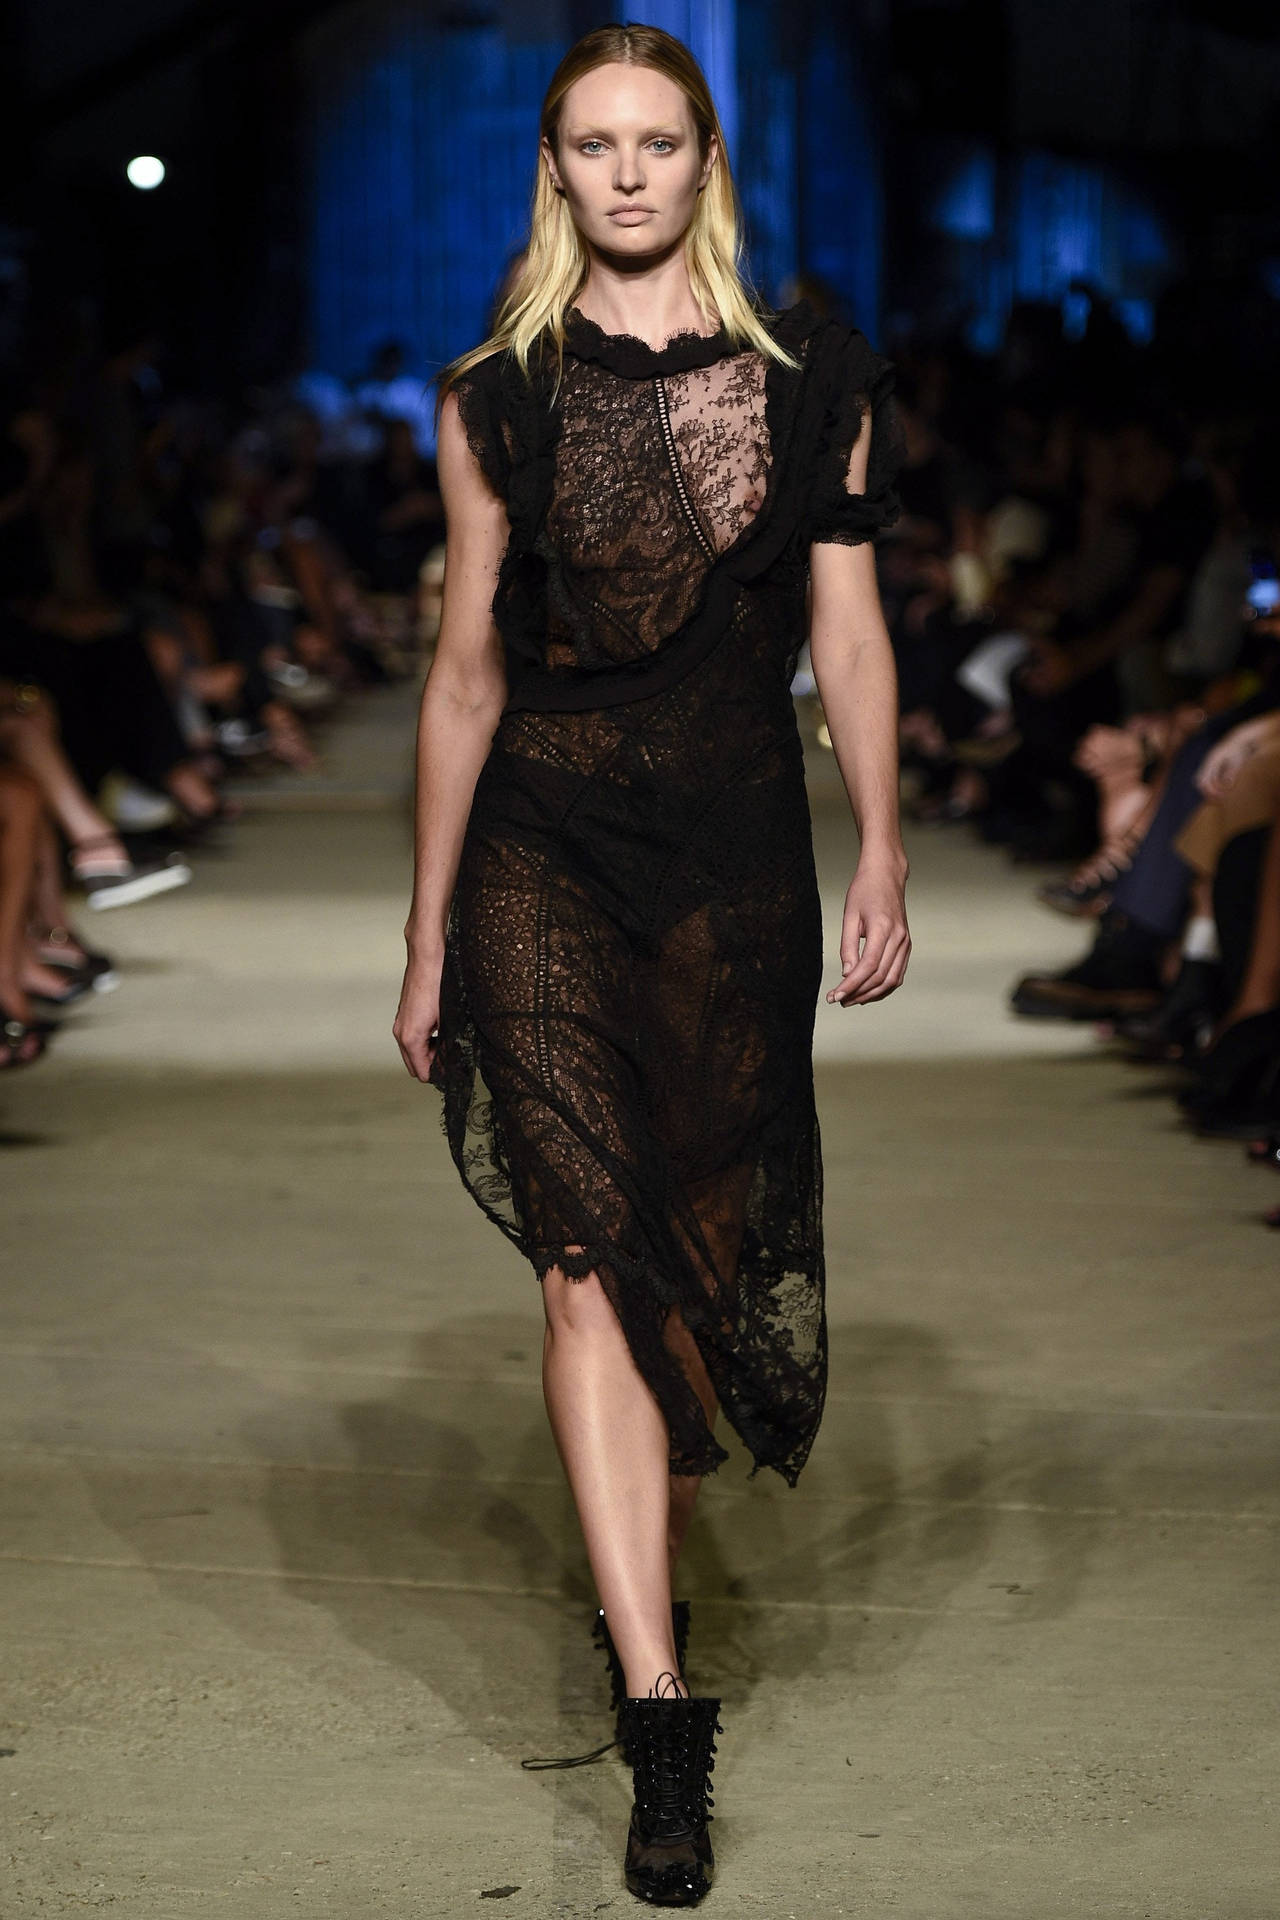 Candice Swanepoel On The Runway For Givenchy's Ready-to-wear 2016 Collection Background